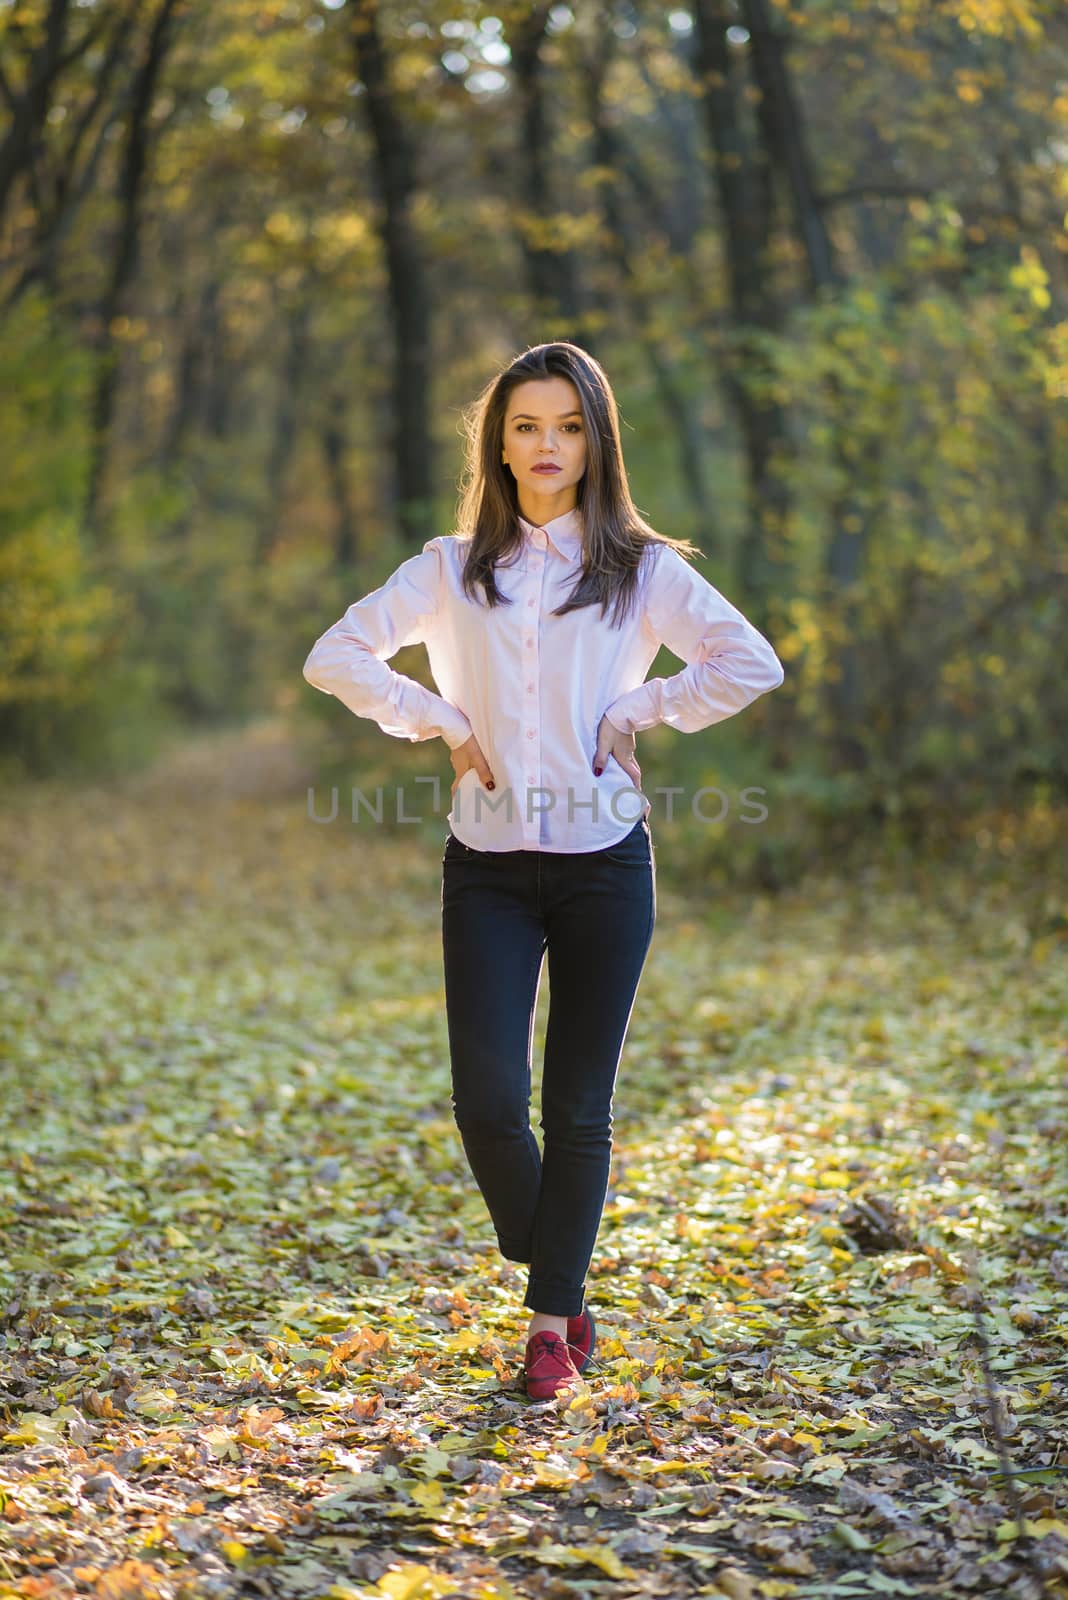 Posing on footpath in forest. A serious looking girls is posing in a pink shirt, dark blue jeans and red shoes in an autumn forest while standing on foliage.